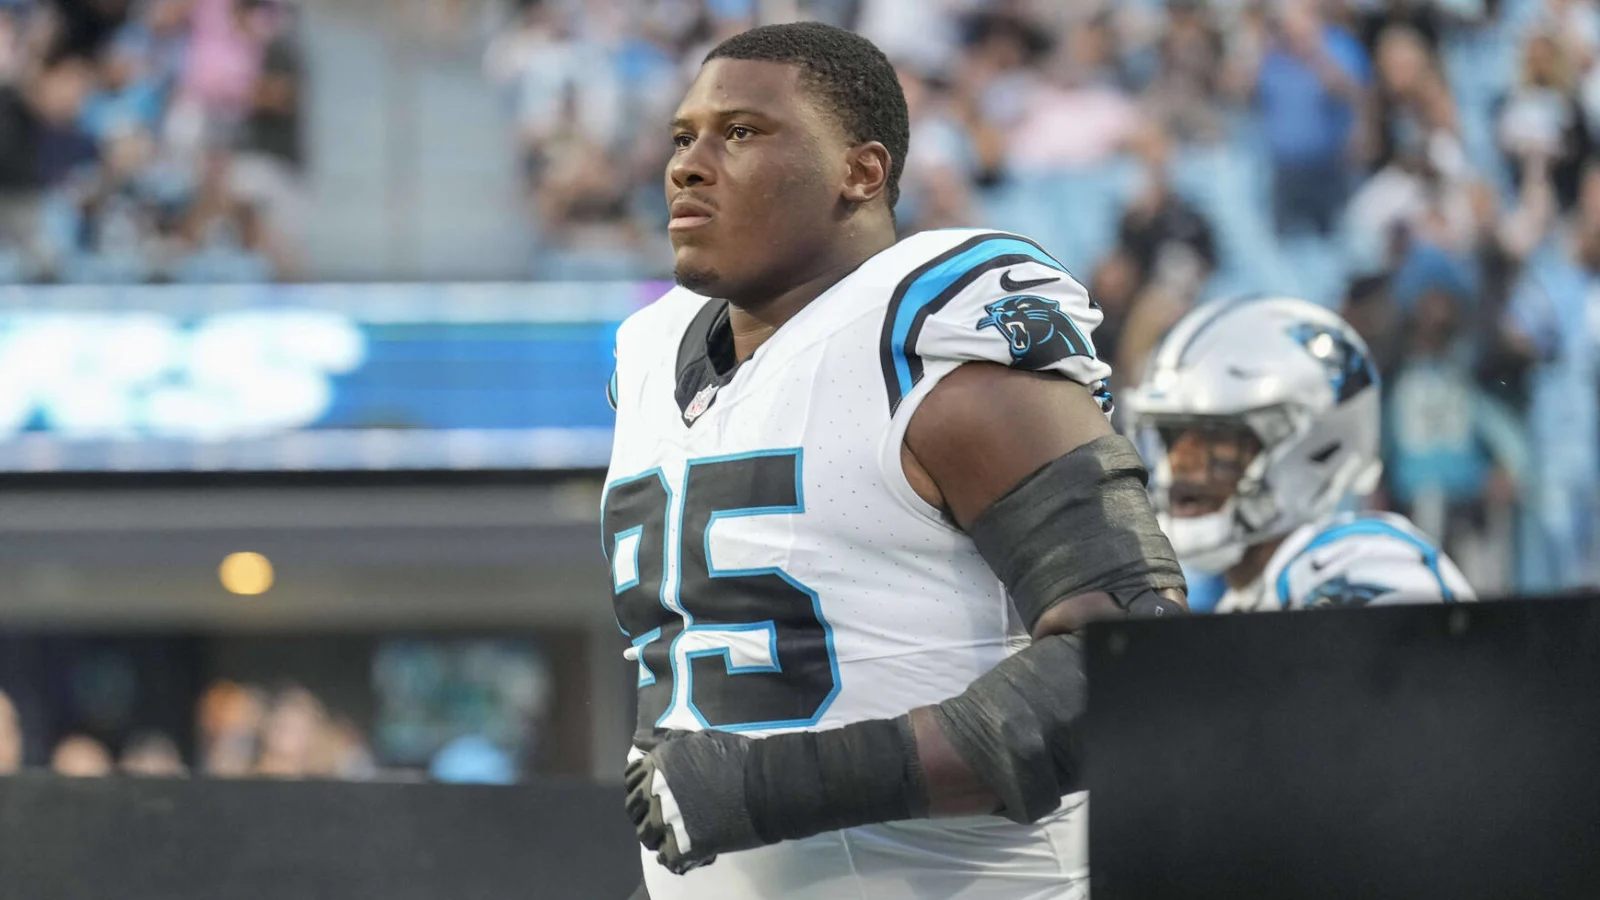  Carolina Panthers Make Big Move Locking In Star Derrick Brown with a Game-Changing Contract Extension---